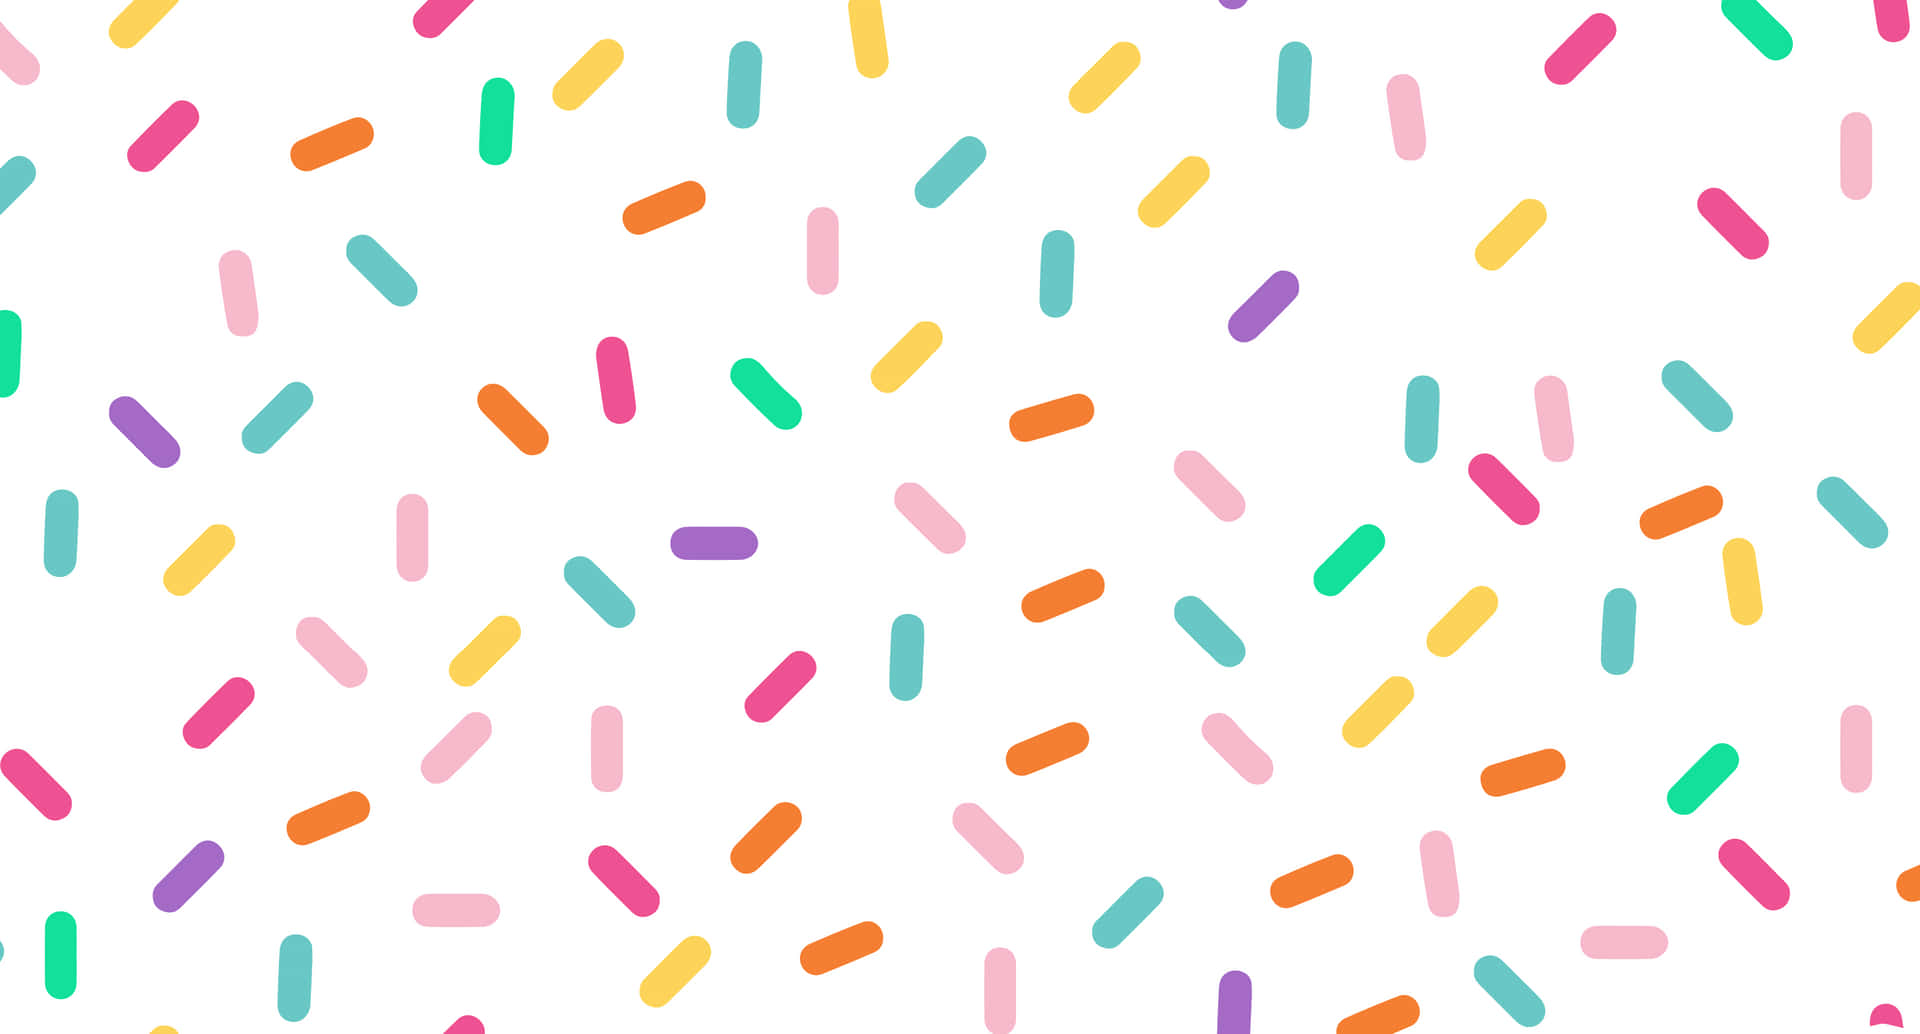 100+] Sprinkle Background s | Wallpapers.com